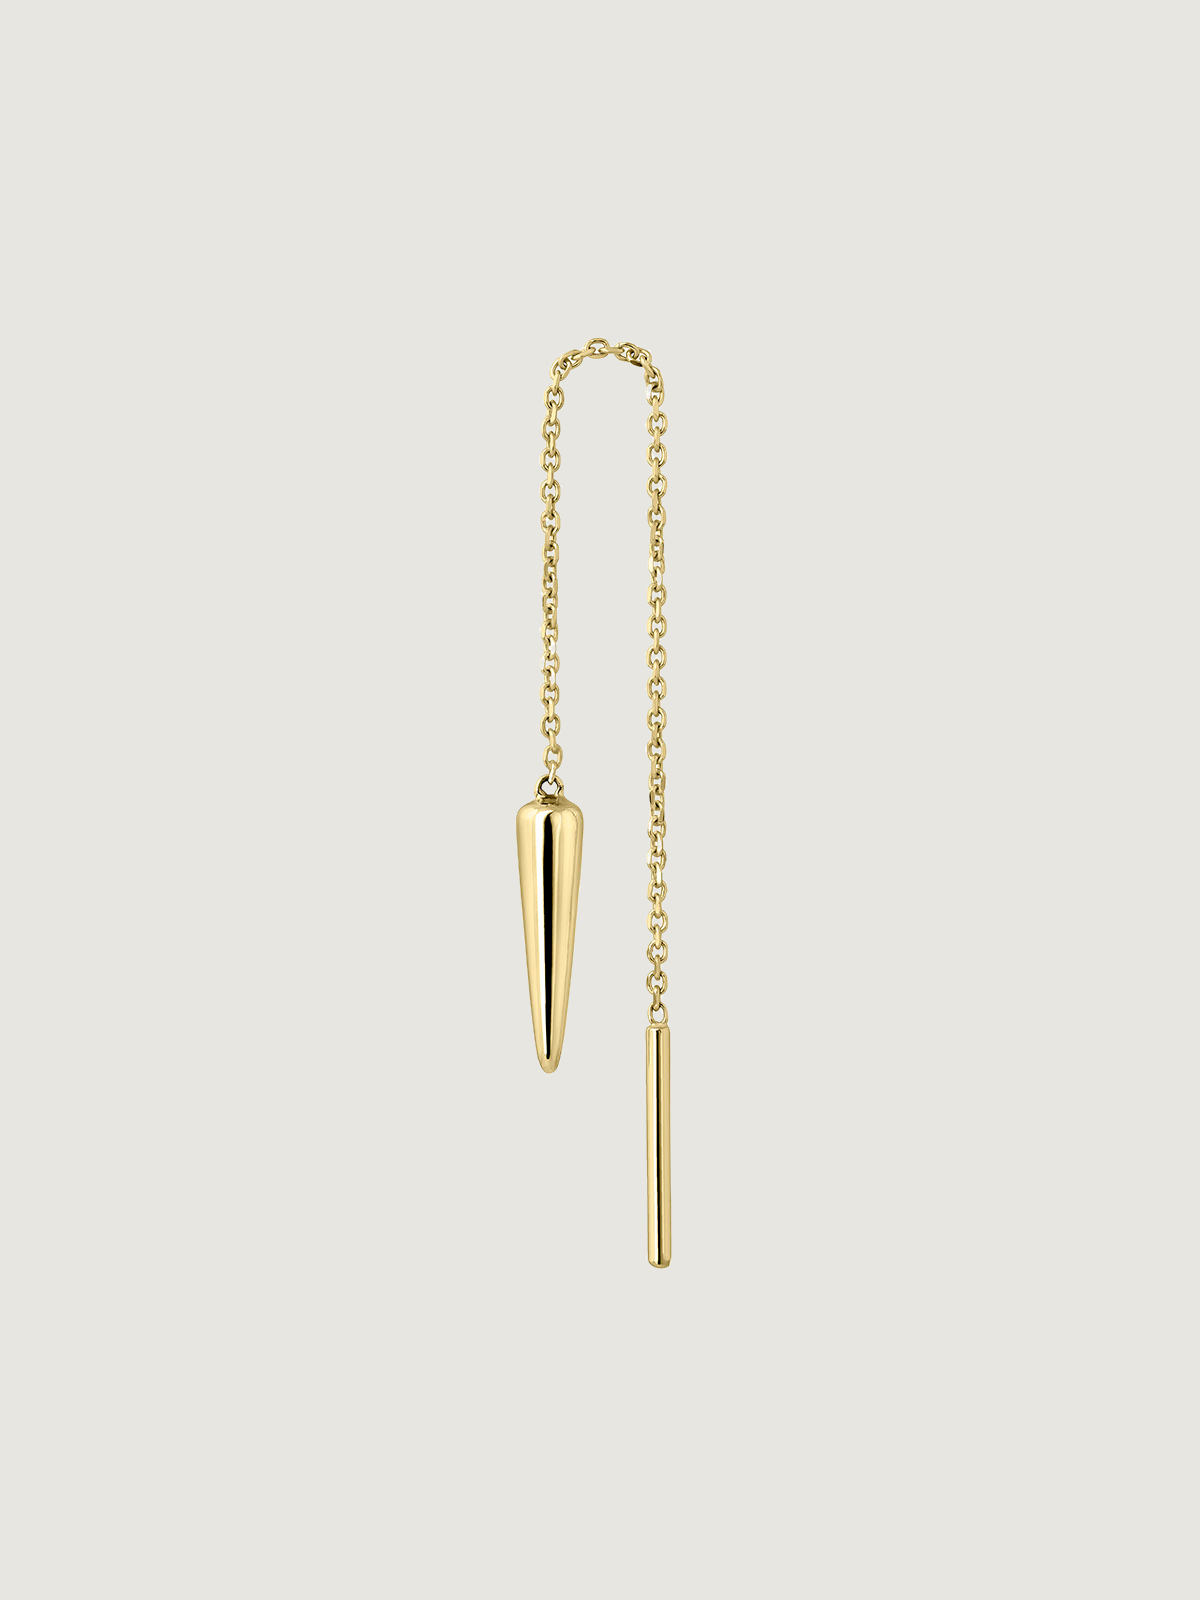 Individual 9K yellow gold earring with chain and spike.